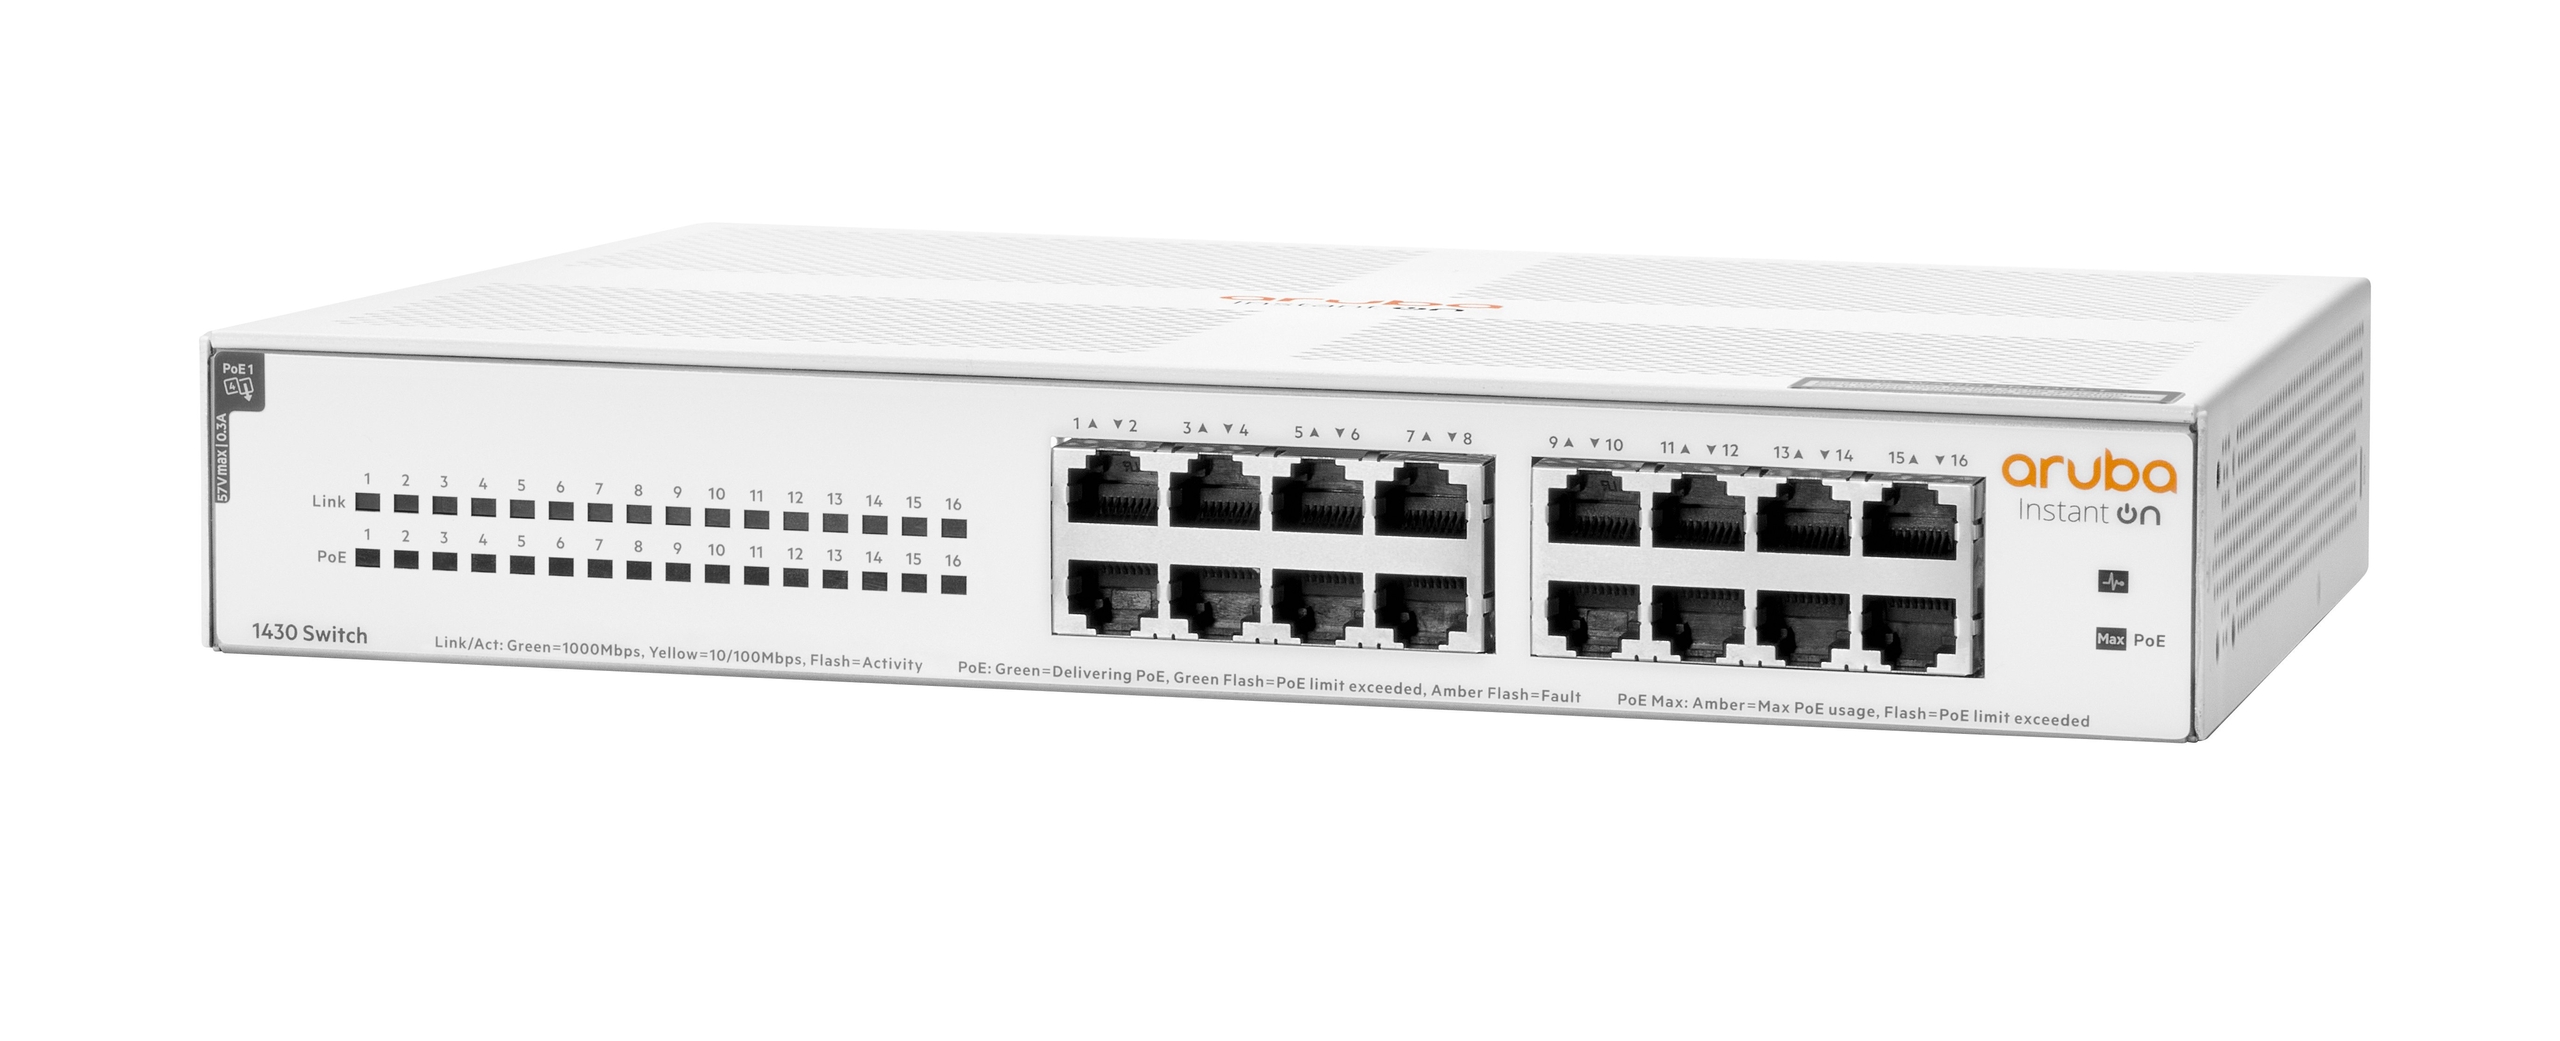 Aruba Instant On 1430 16-Port PoE Switch Front Angle